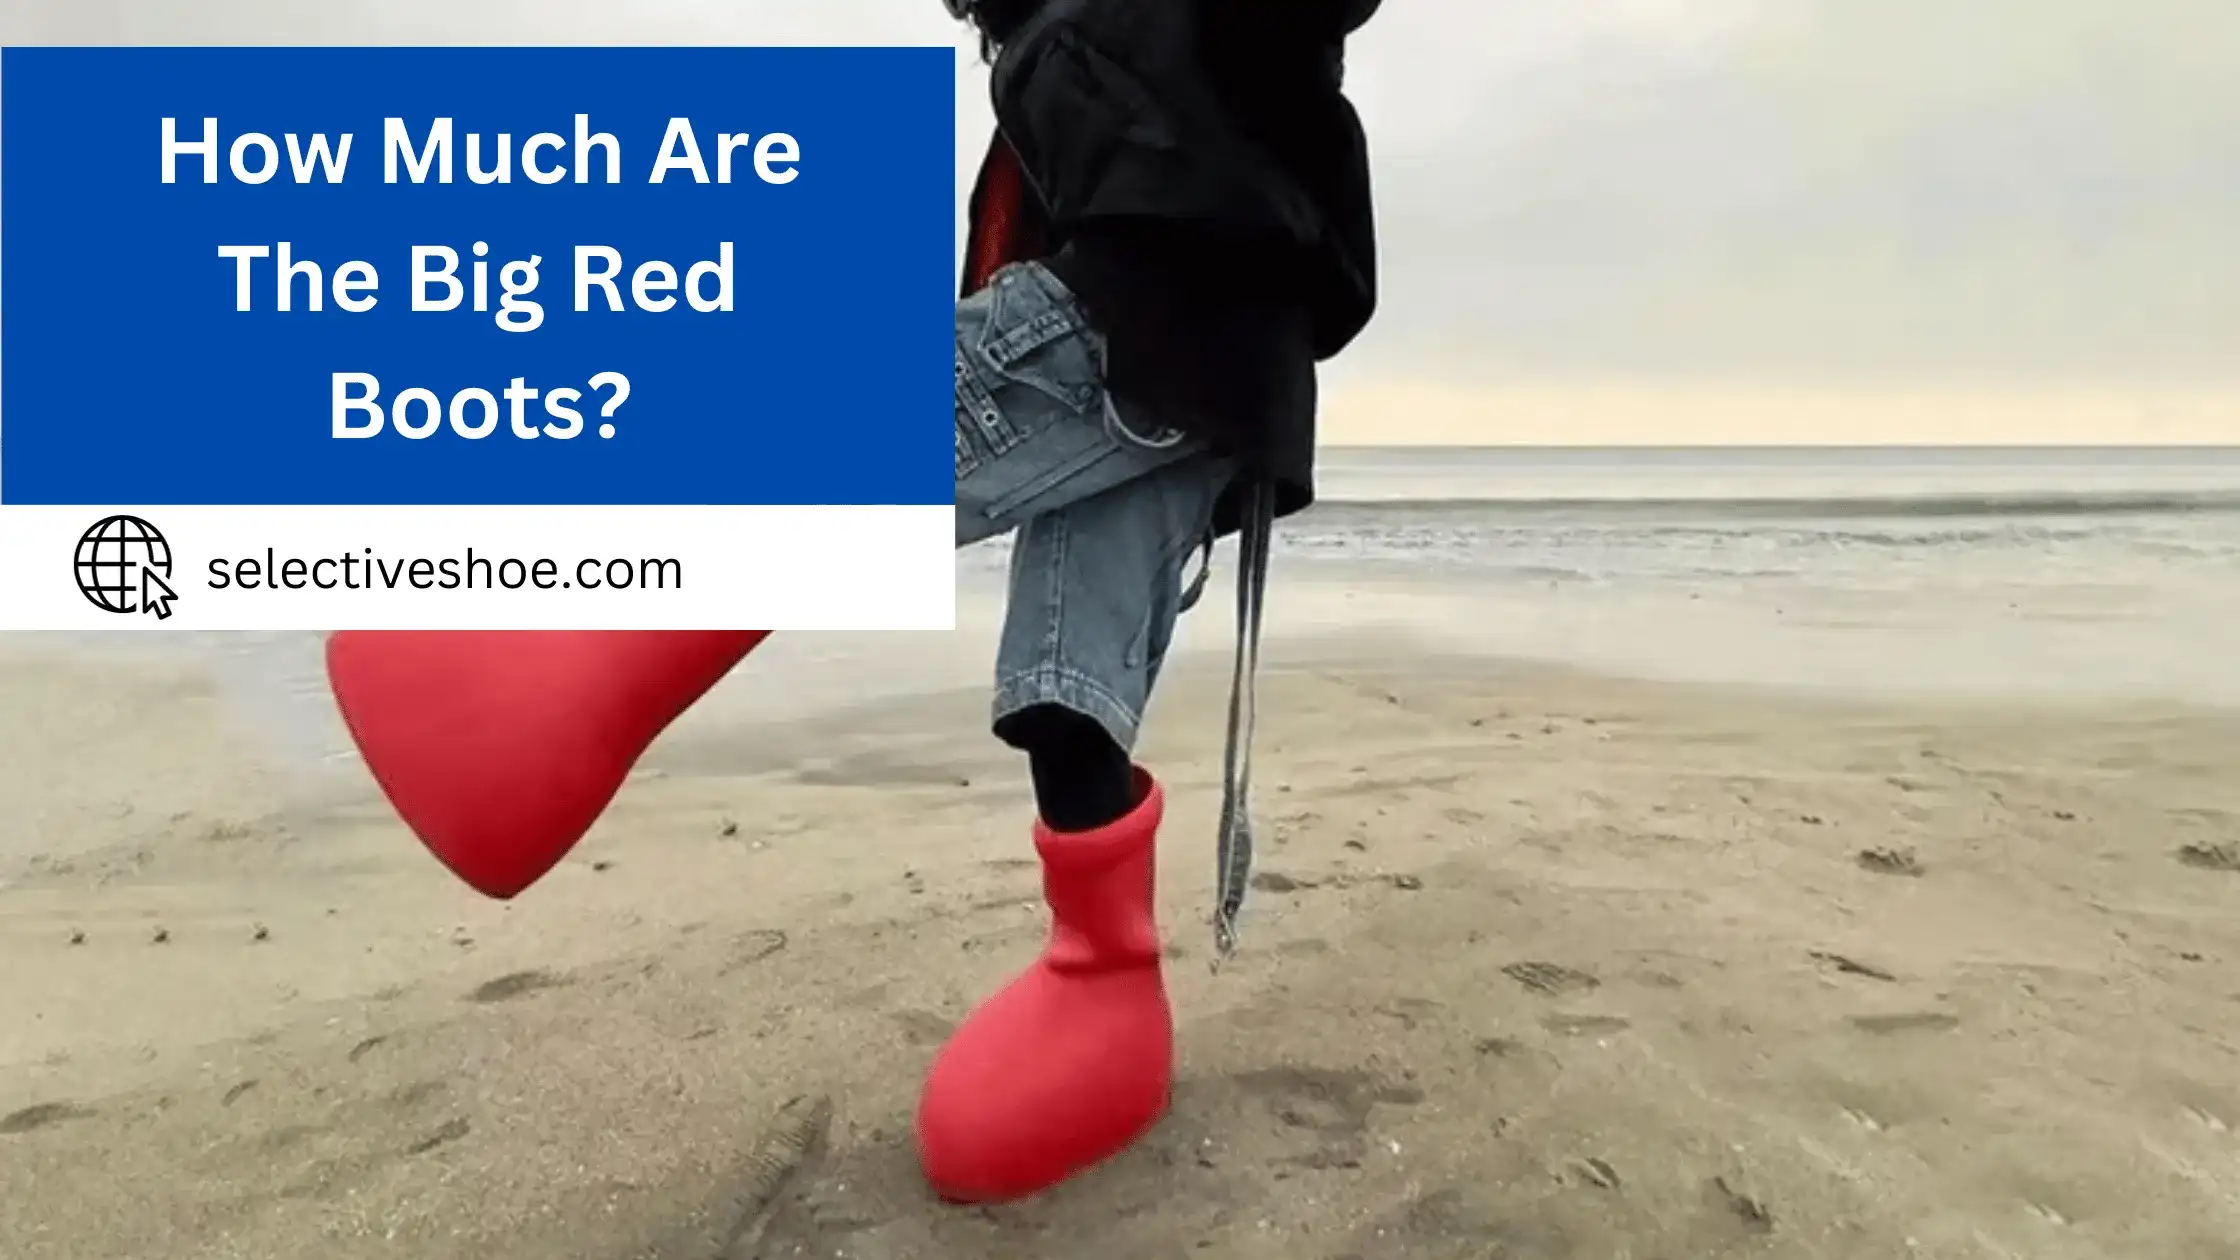 How Much Are The Big Red Boots? Detailed Information